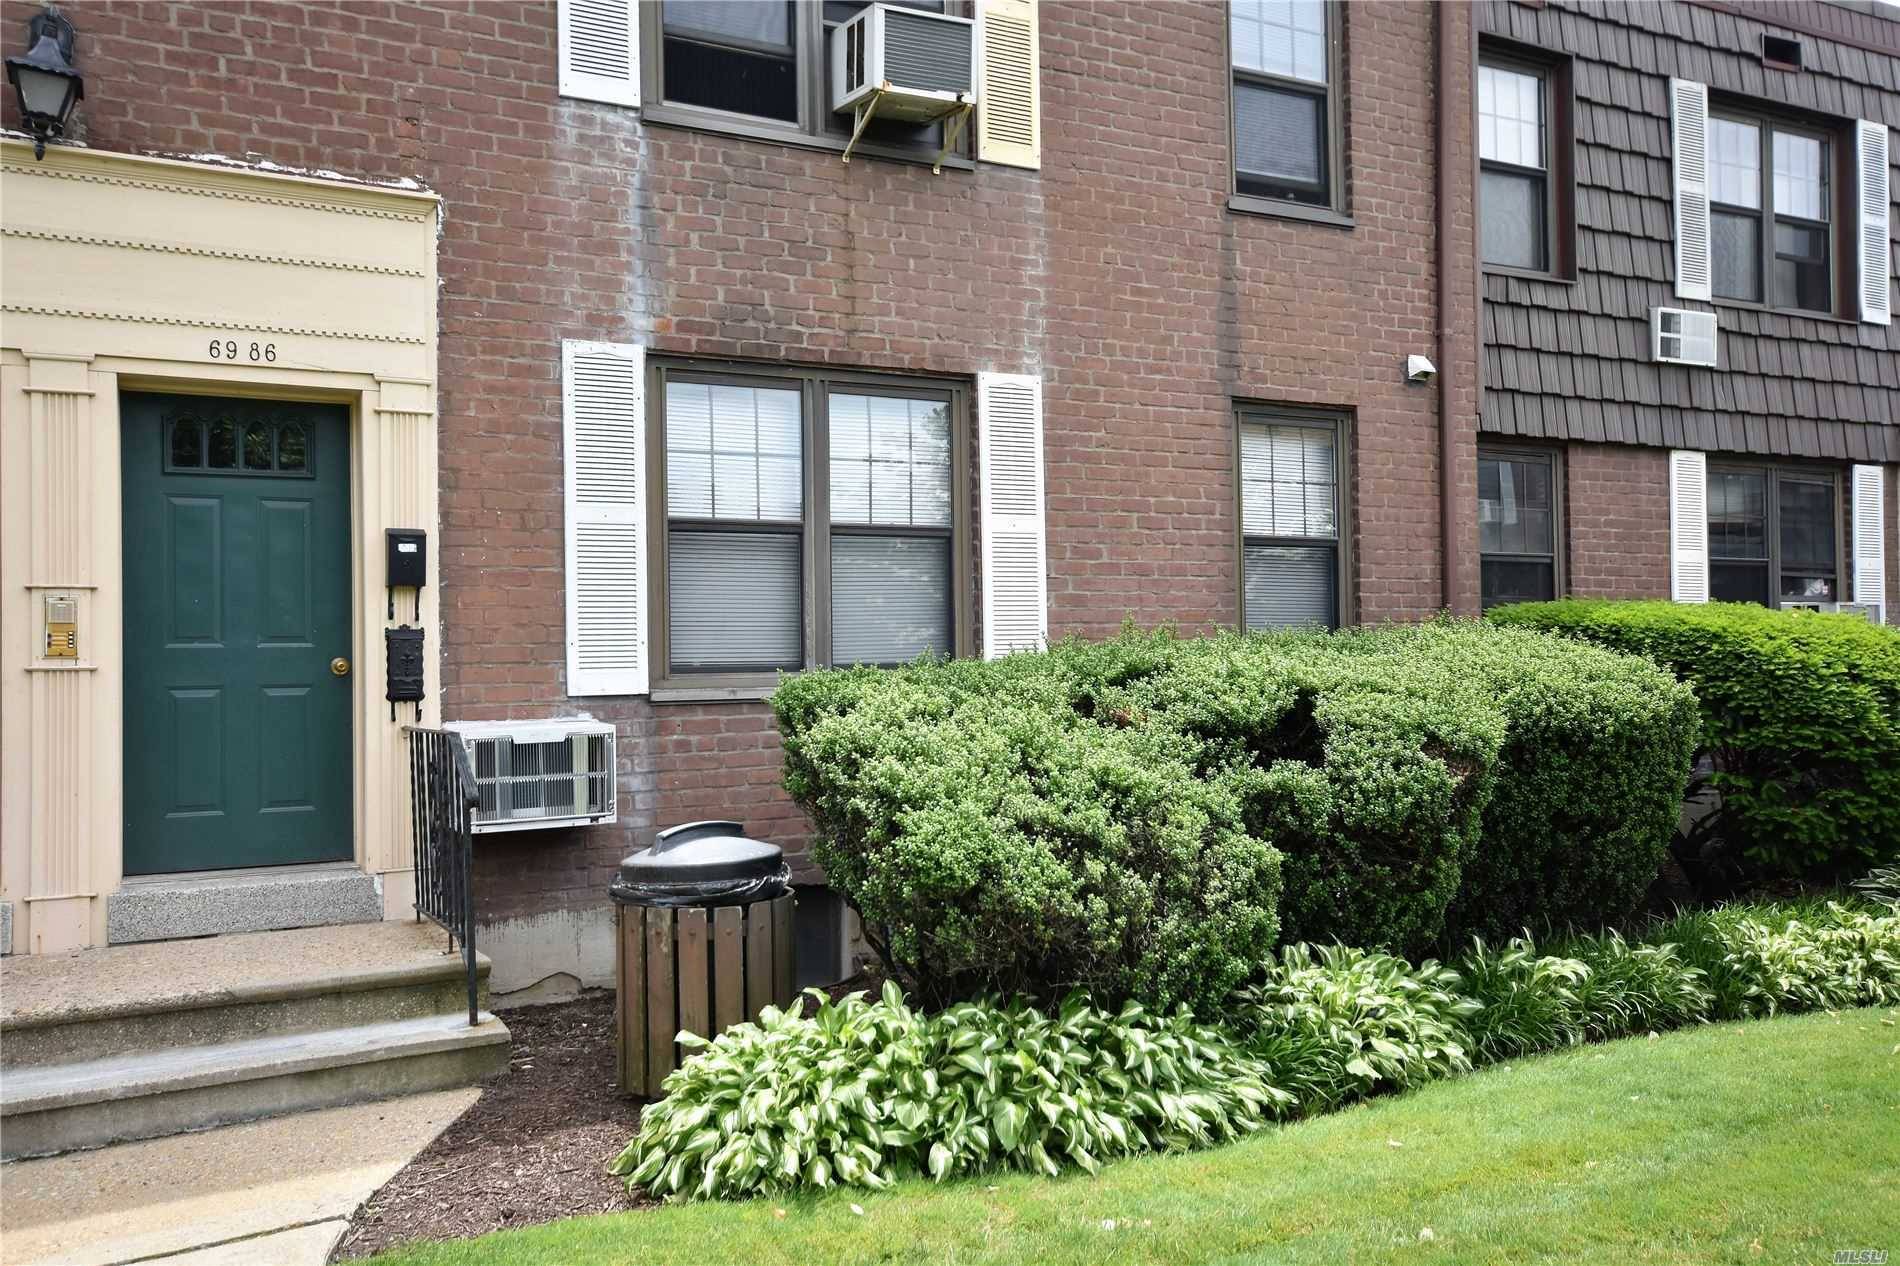 Lowest priced 2BR Condo in the area !